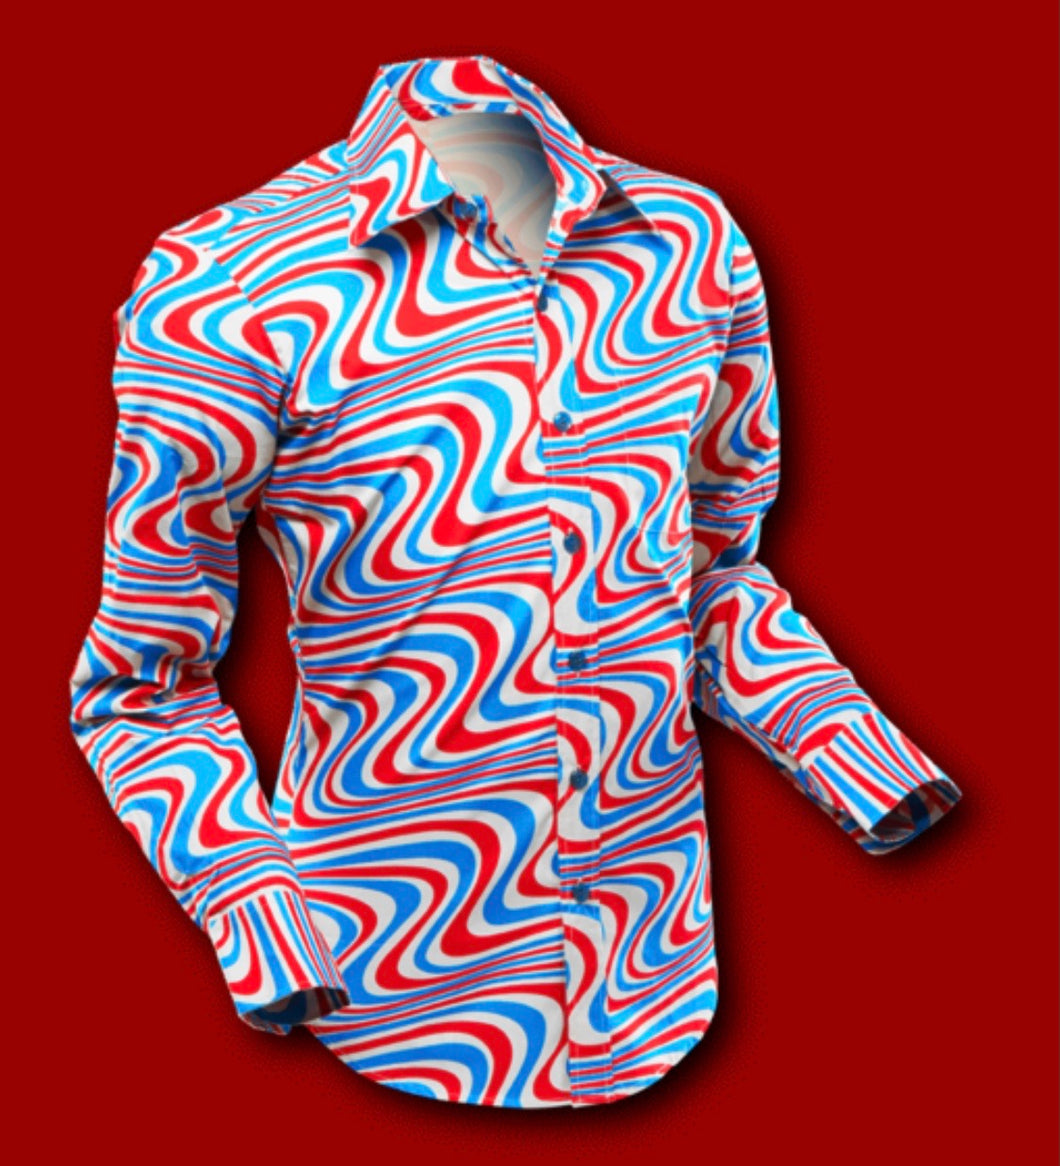 Wavyline design long sleeved Retro 70s style shirt in Grey-Petrol-Red